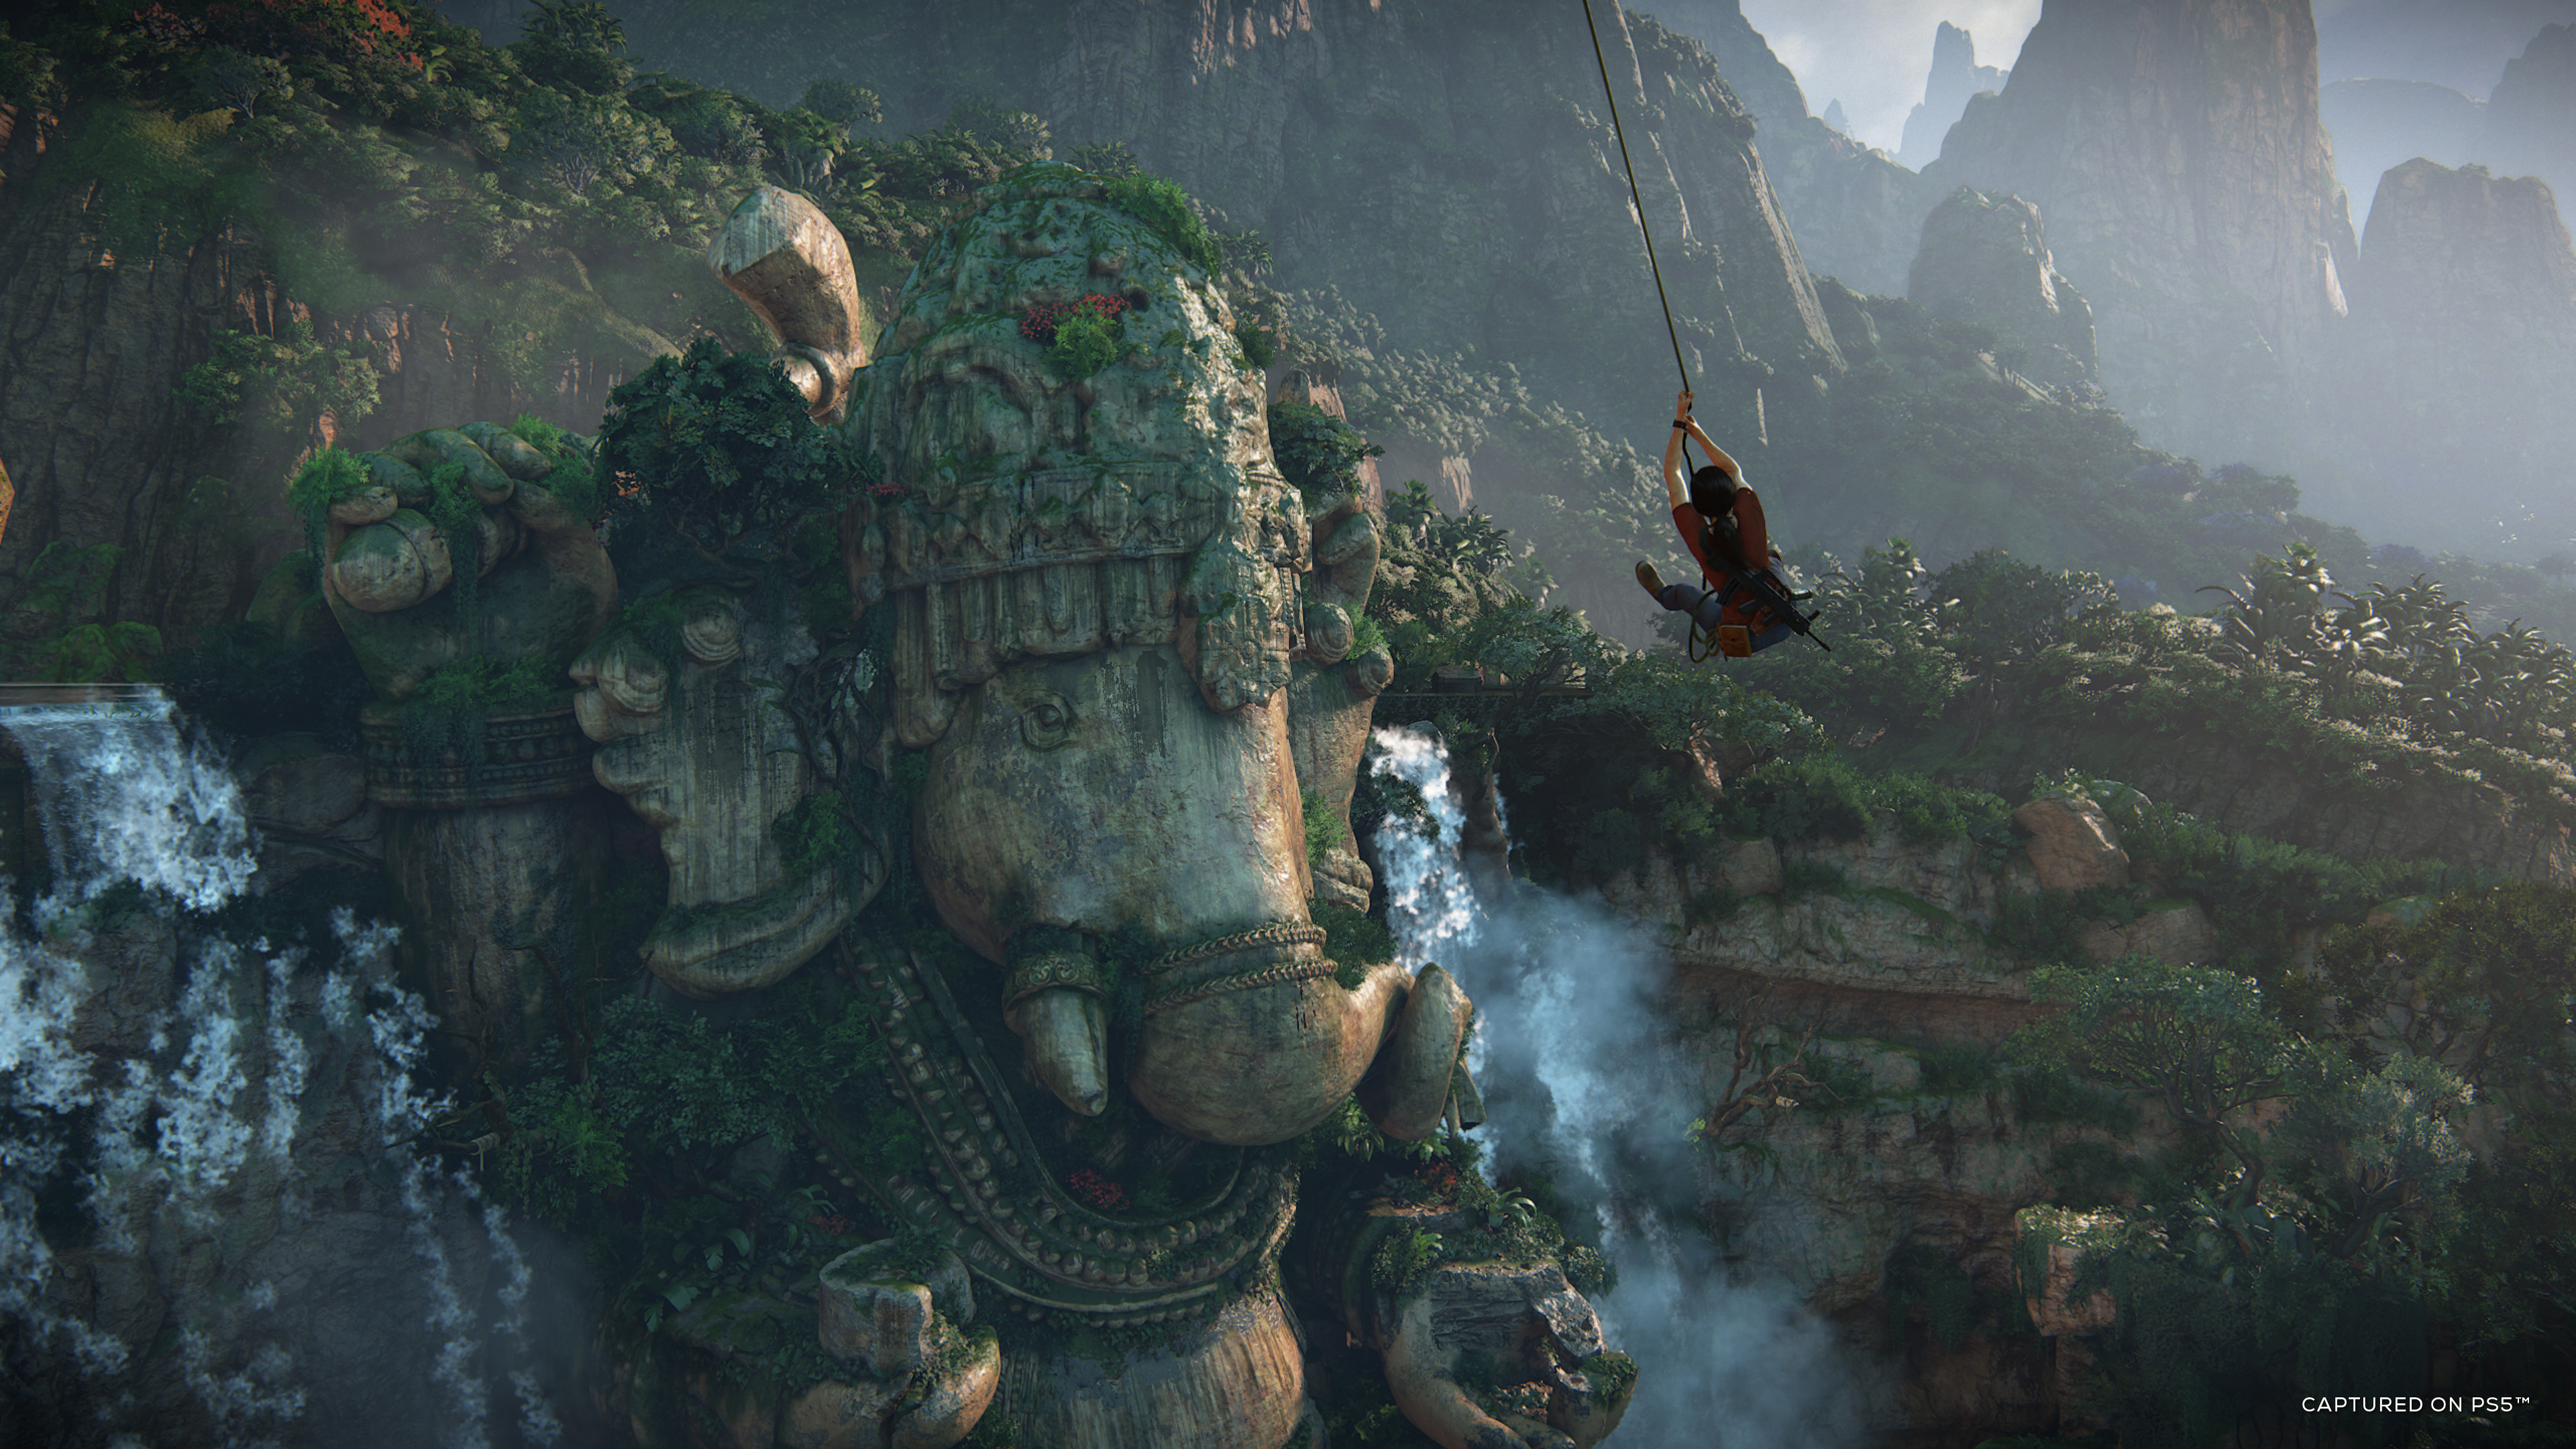 Review — Uncharted: Legacy of Thieves Collection, by Stims